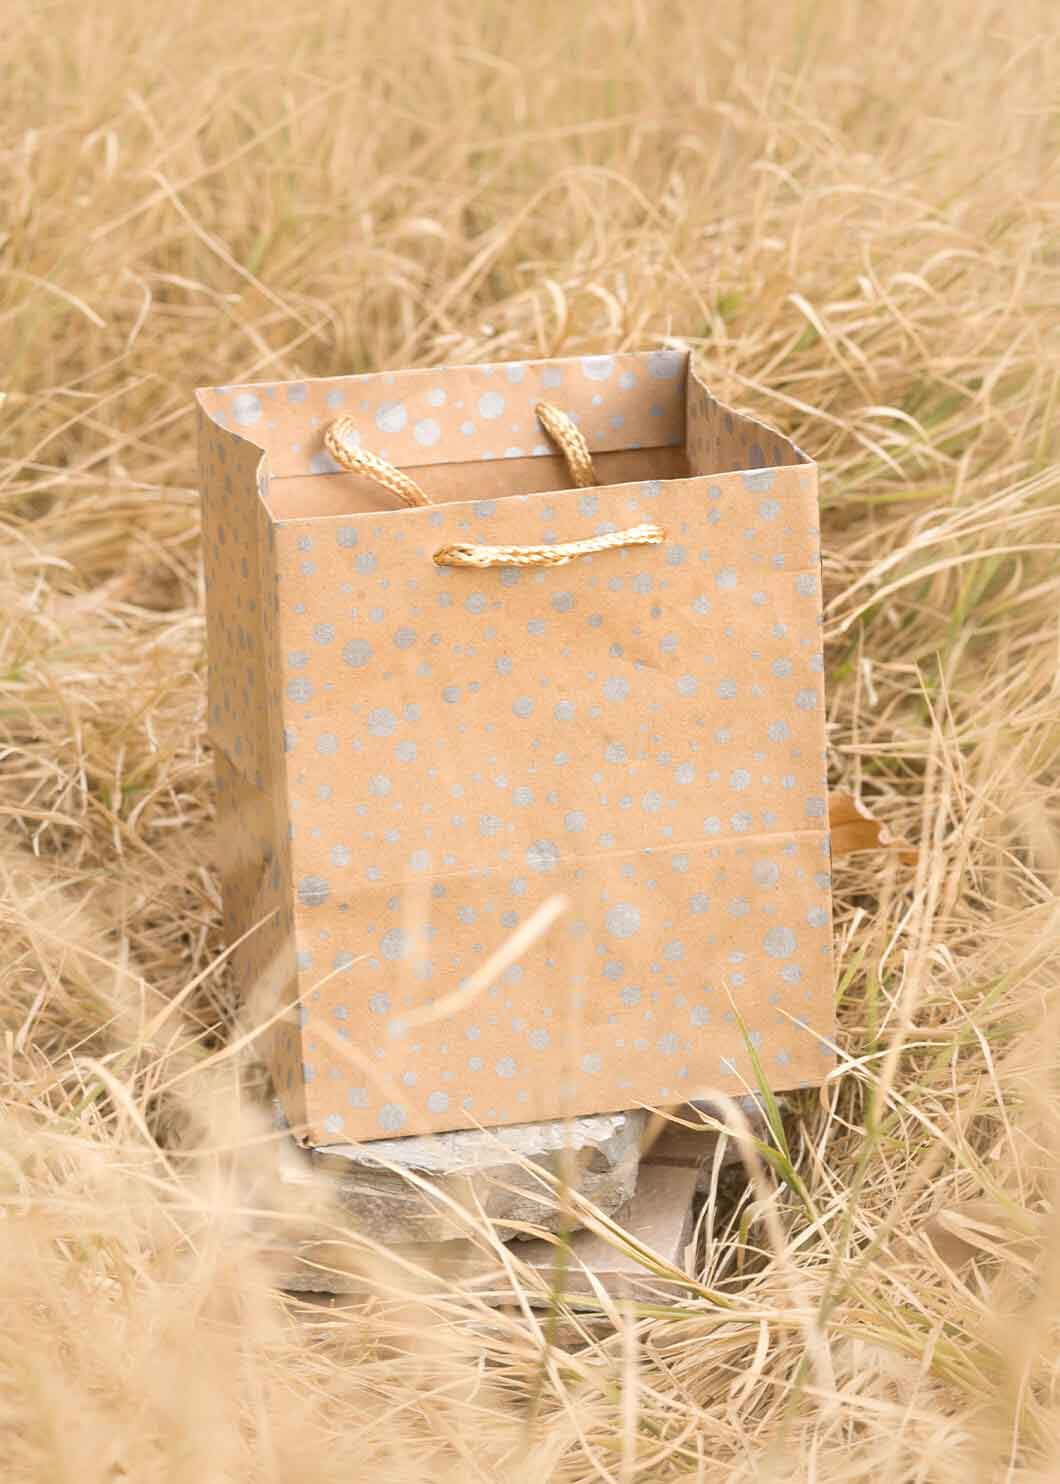 Craft Paper Dotted Pattern - Craft Paper Bag - Golden Silver Red - 5x5 Paper Bag